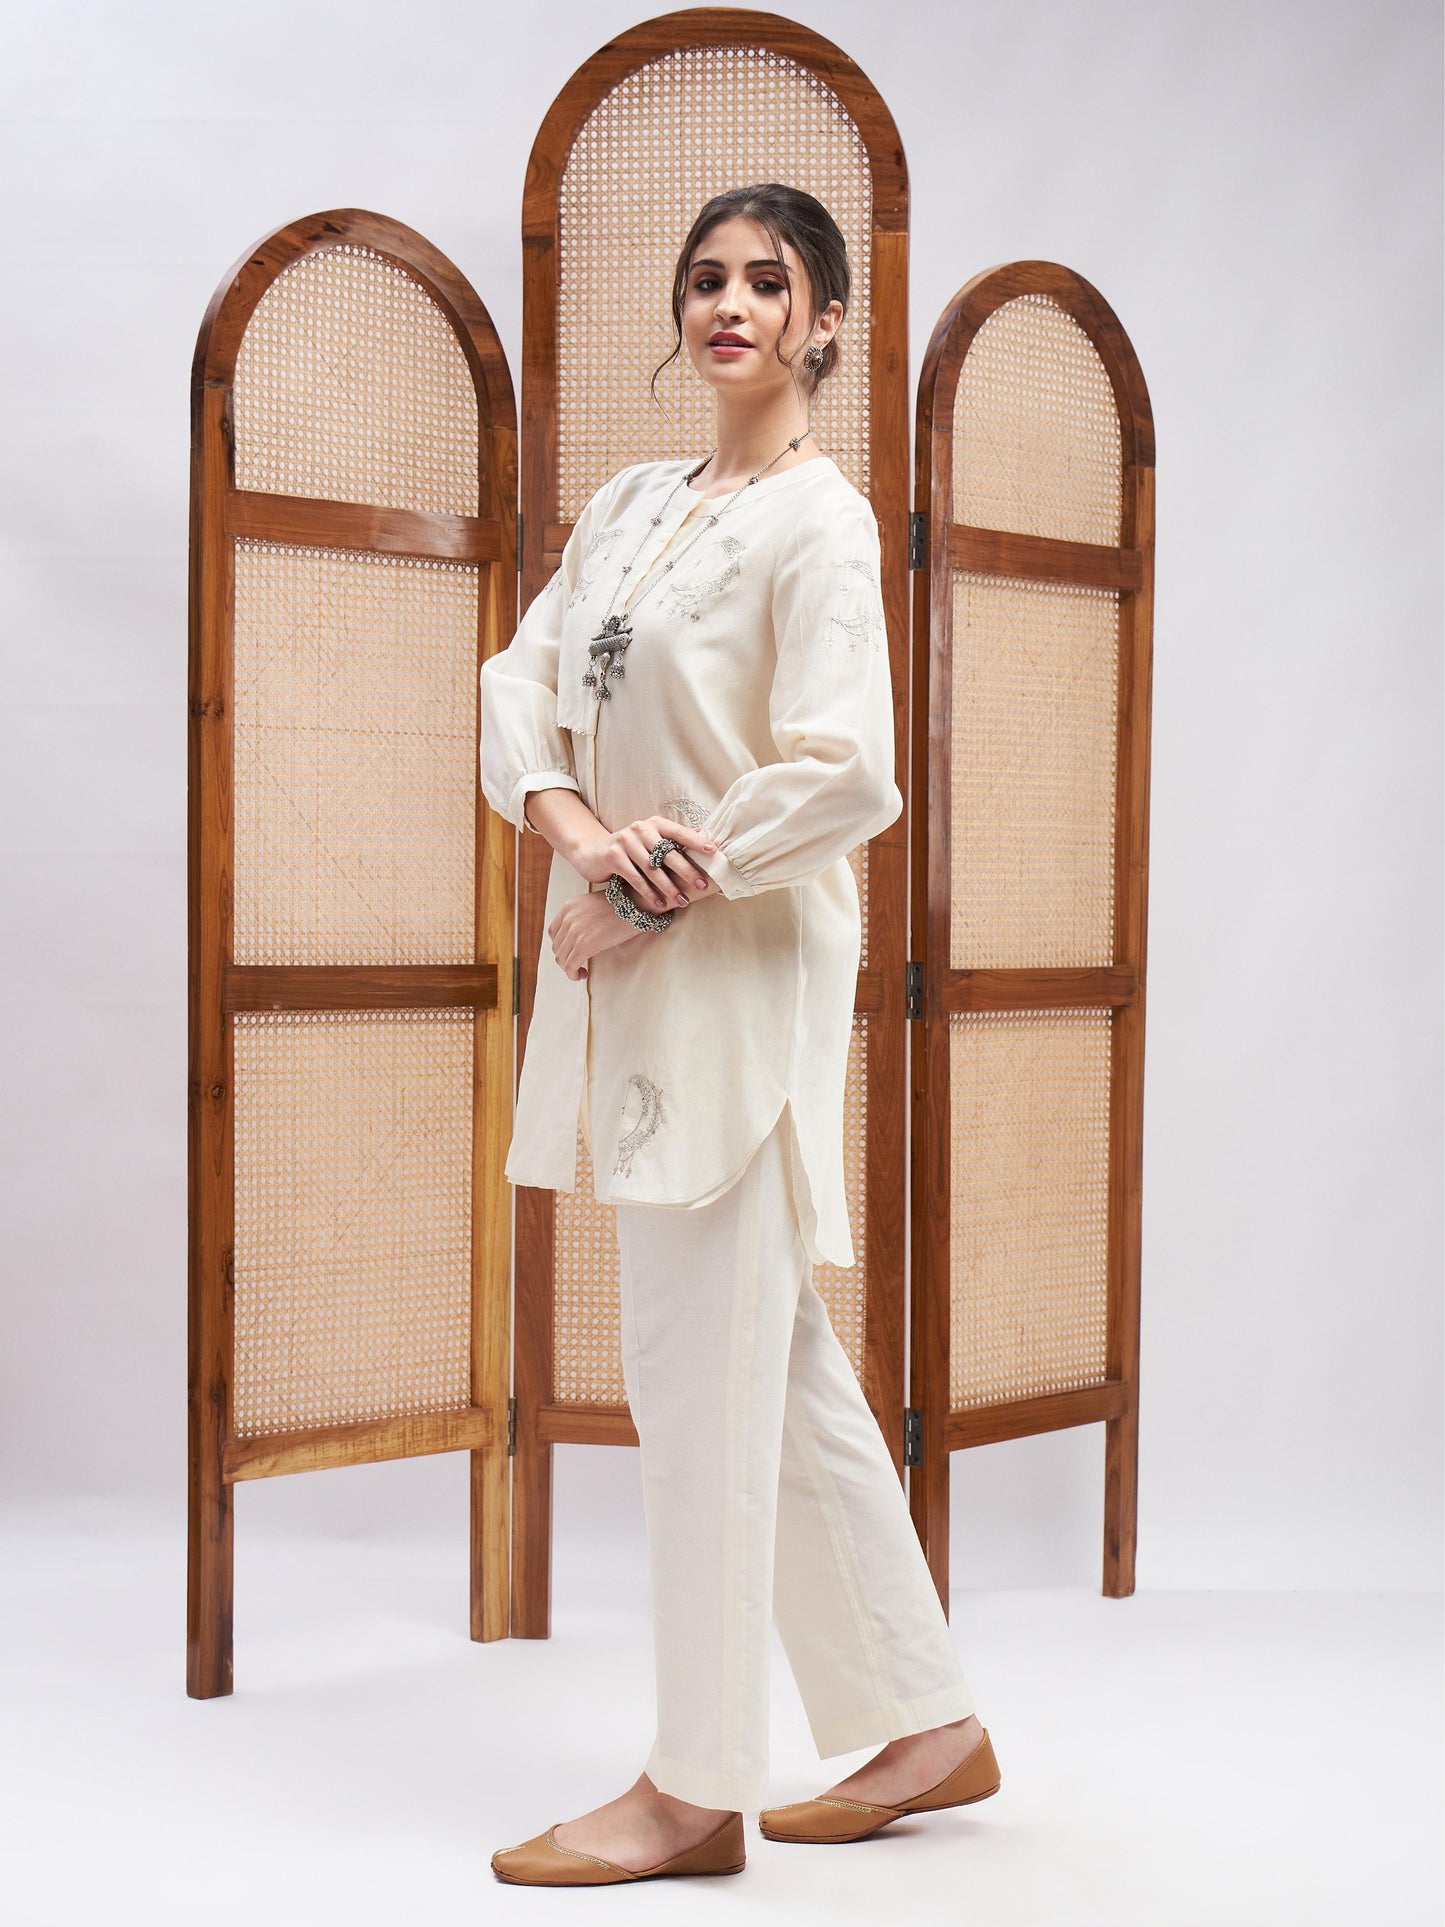 Off-White Chanderi Silk Kurta Set at Kamakhyaa by RoohbyRidhimaa. This item is Cotton, Cotton Mulmul, Kurta Sets, Off-white, Office Wear, Relaxed Fit, Sequin Embroidered, Silk Chanderi, Toxin free